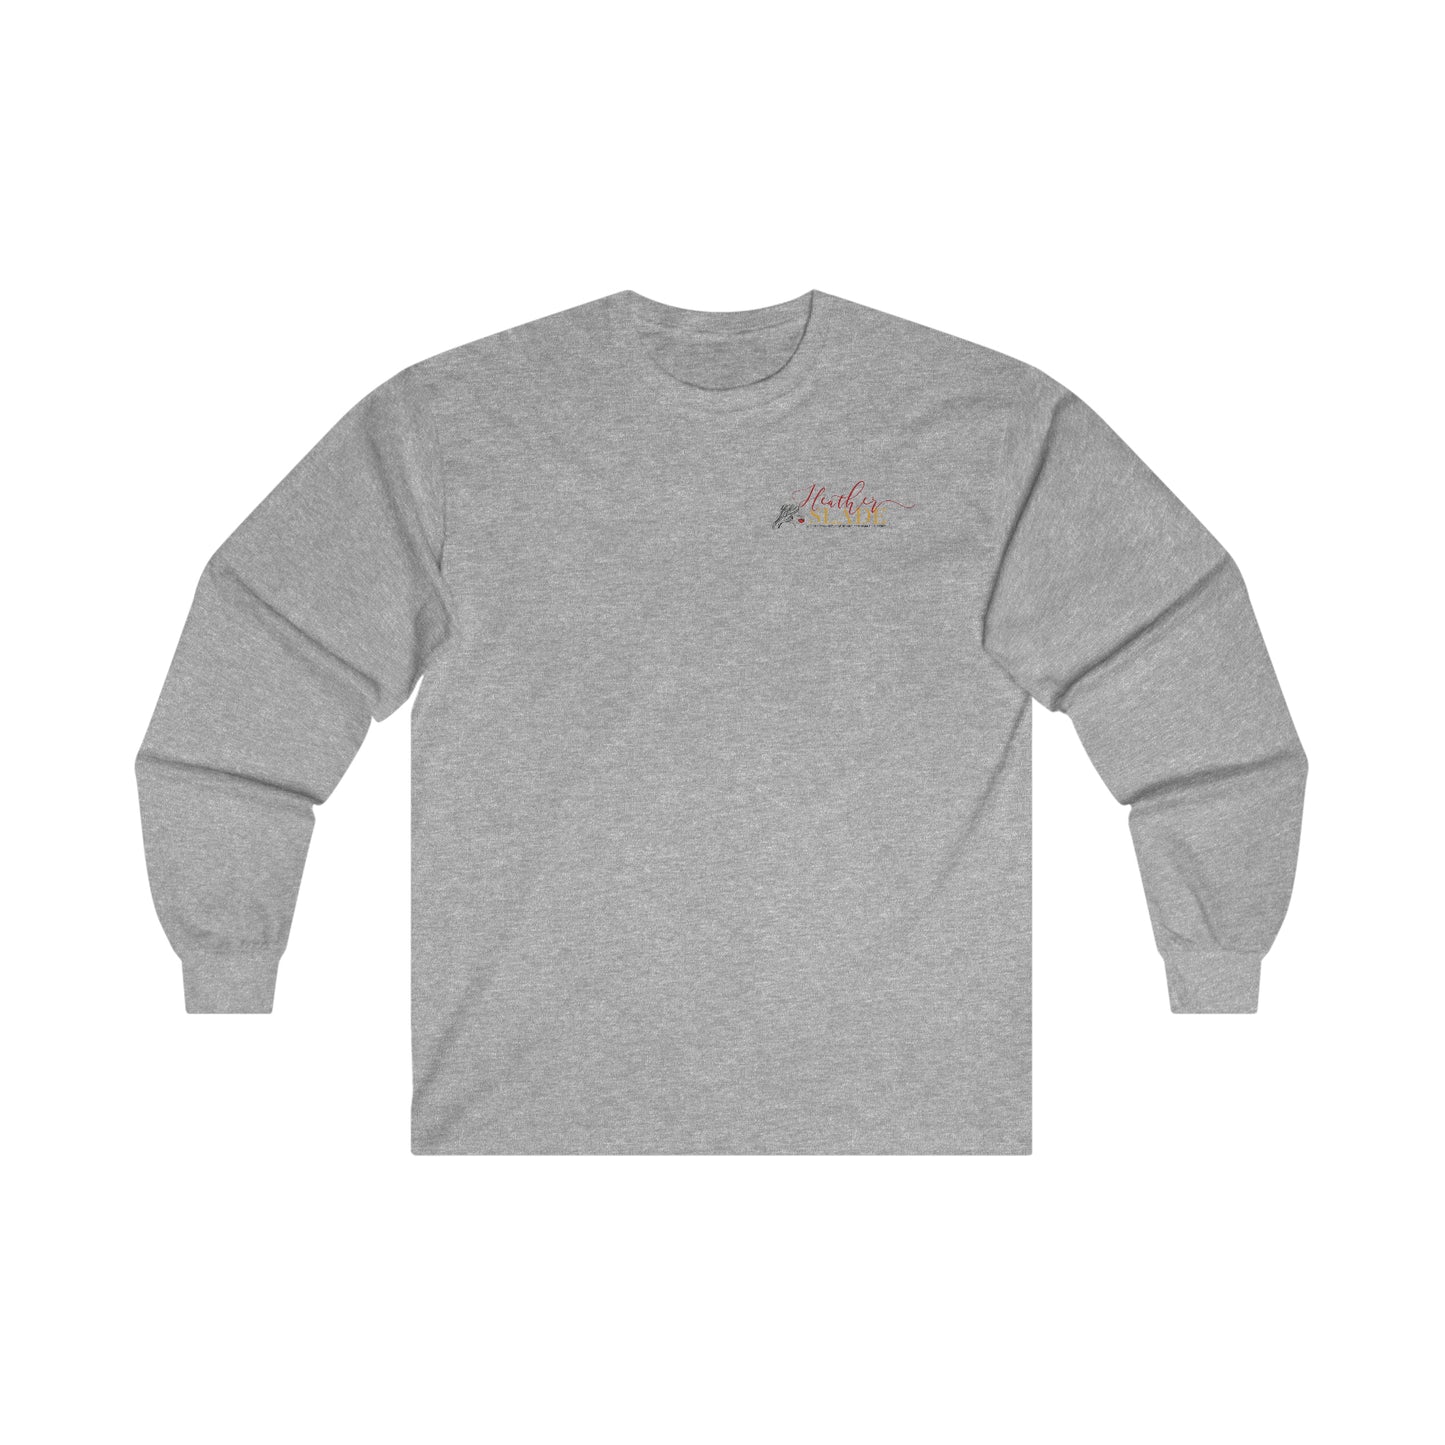 K19 Shadow Operations Team One Ultra Cotton Long Sleeve Tee